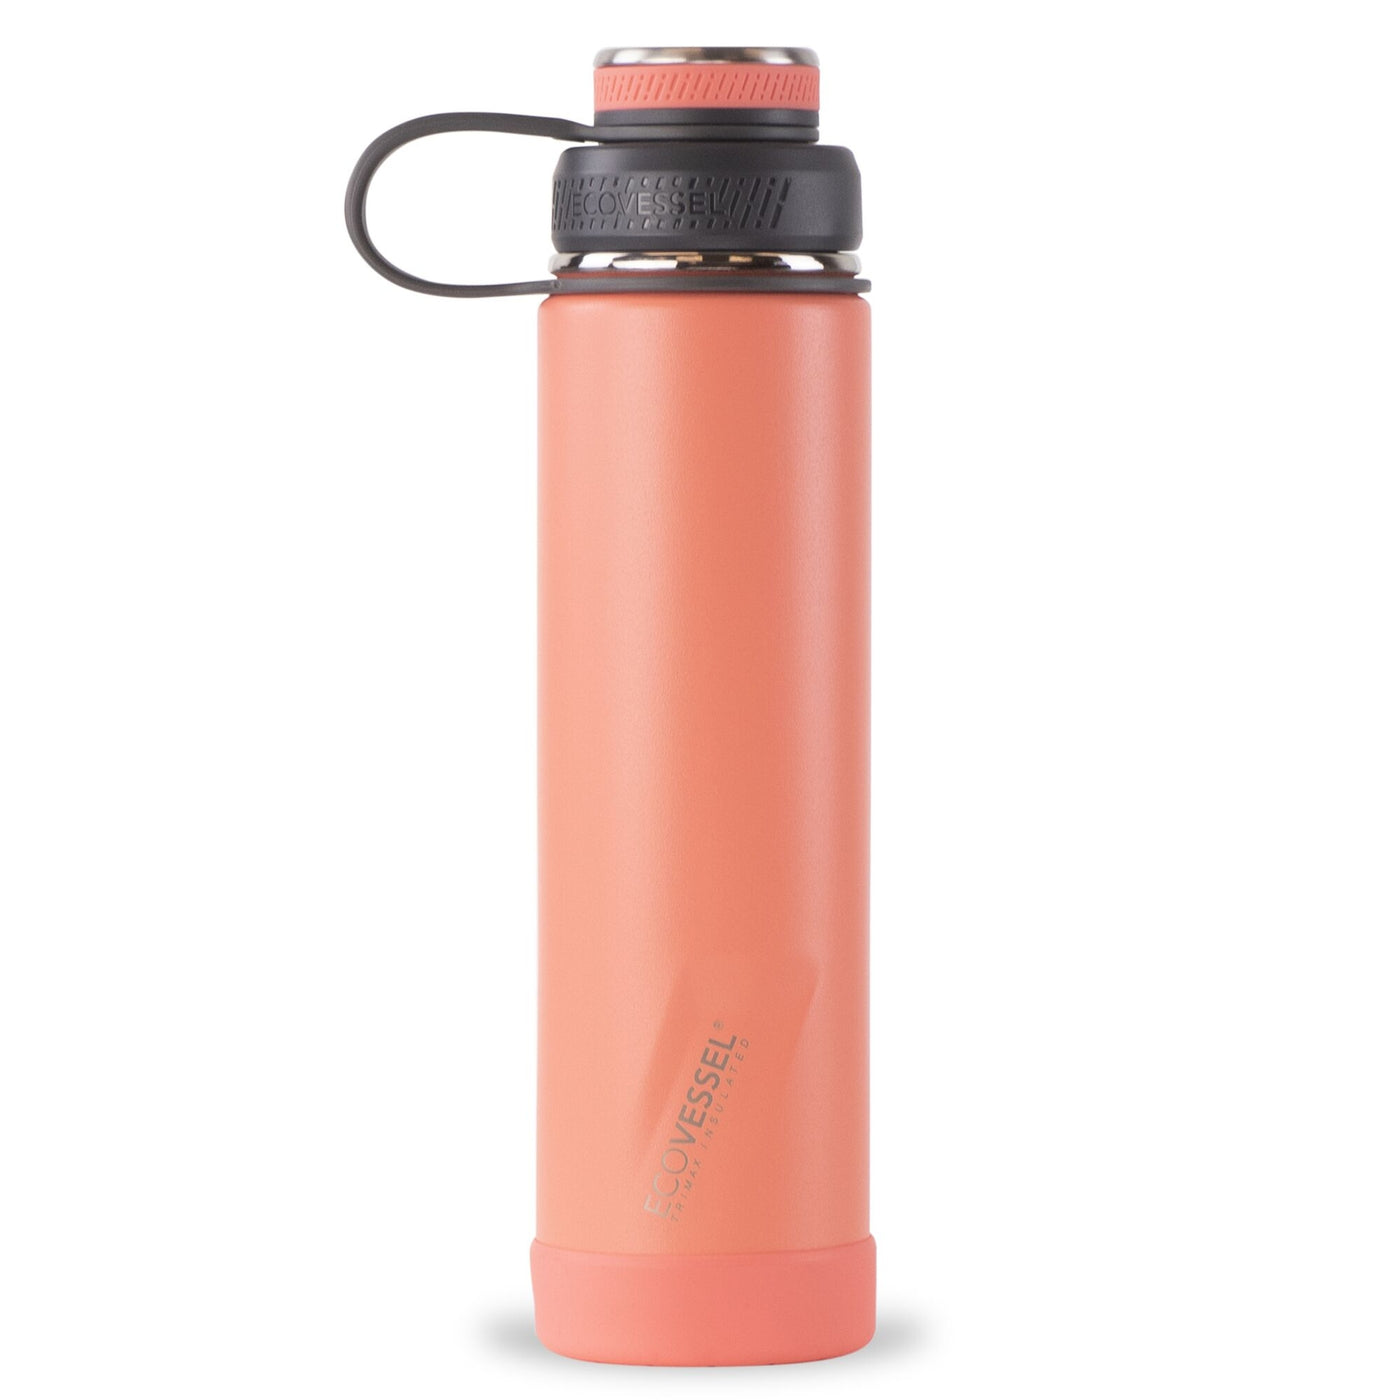 Boulder 24oz Tropical Mango Insulated Stainless Steel Bottle